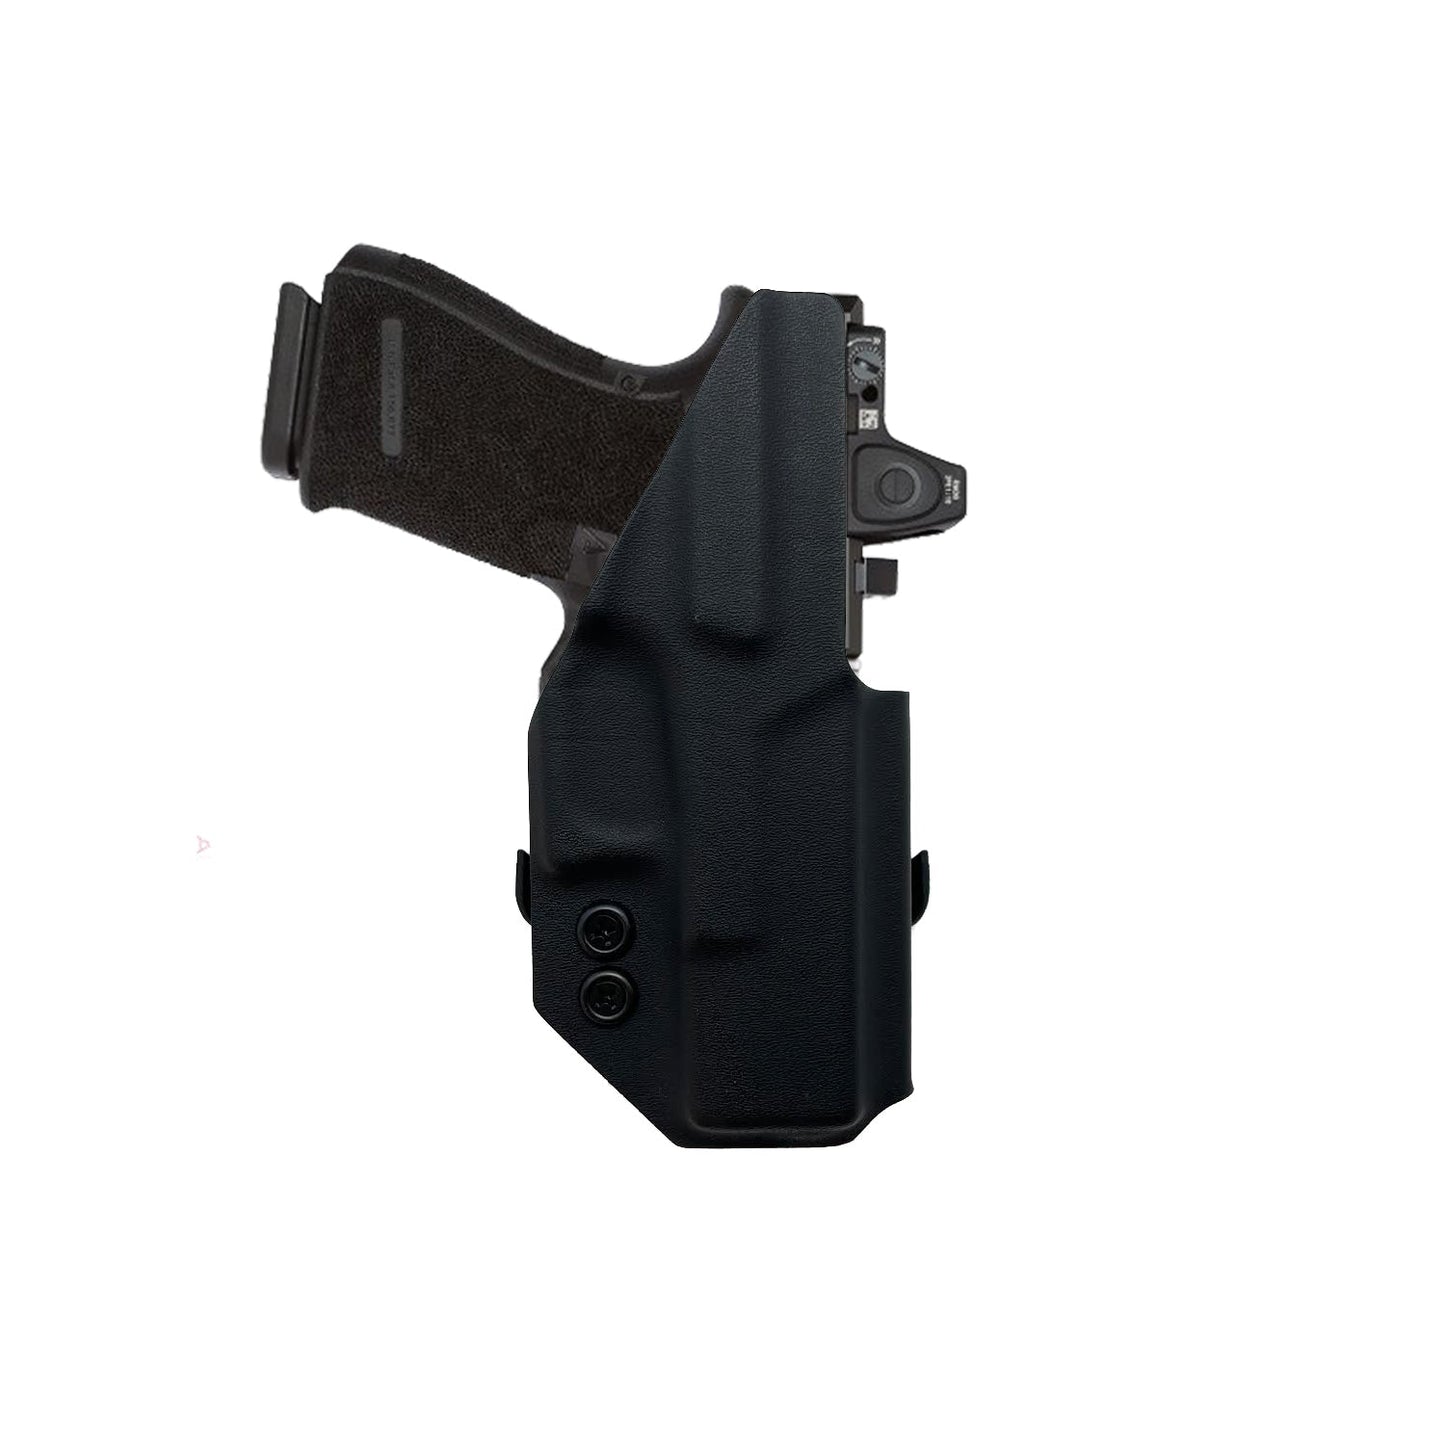 XD 3" OWB (Outside The Waistband Holster)